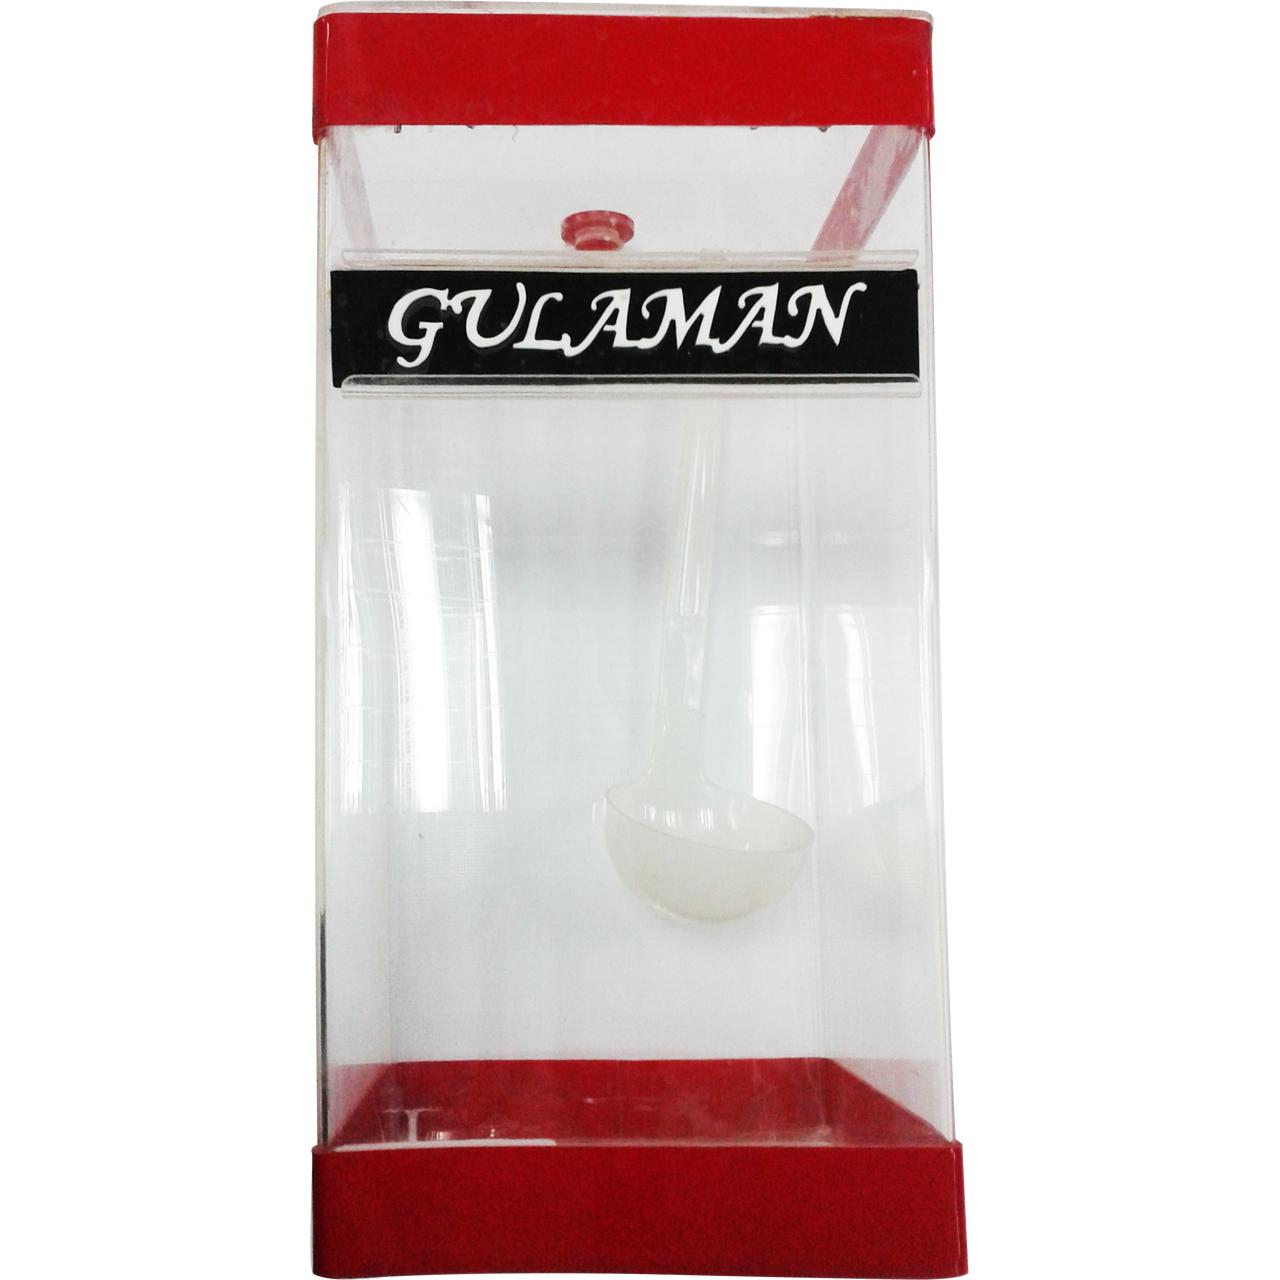 Gulaman Jar with Name Tag and Laddle